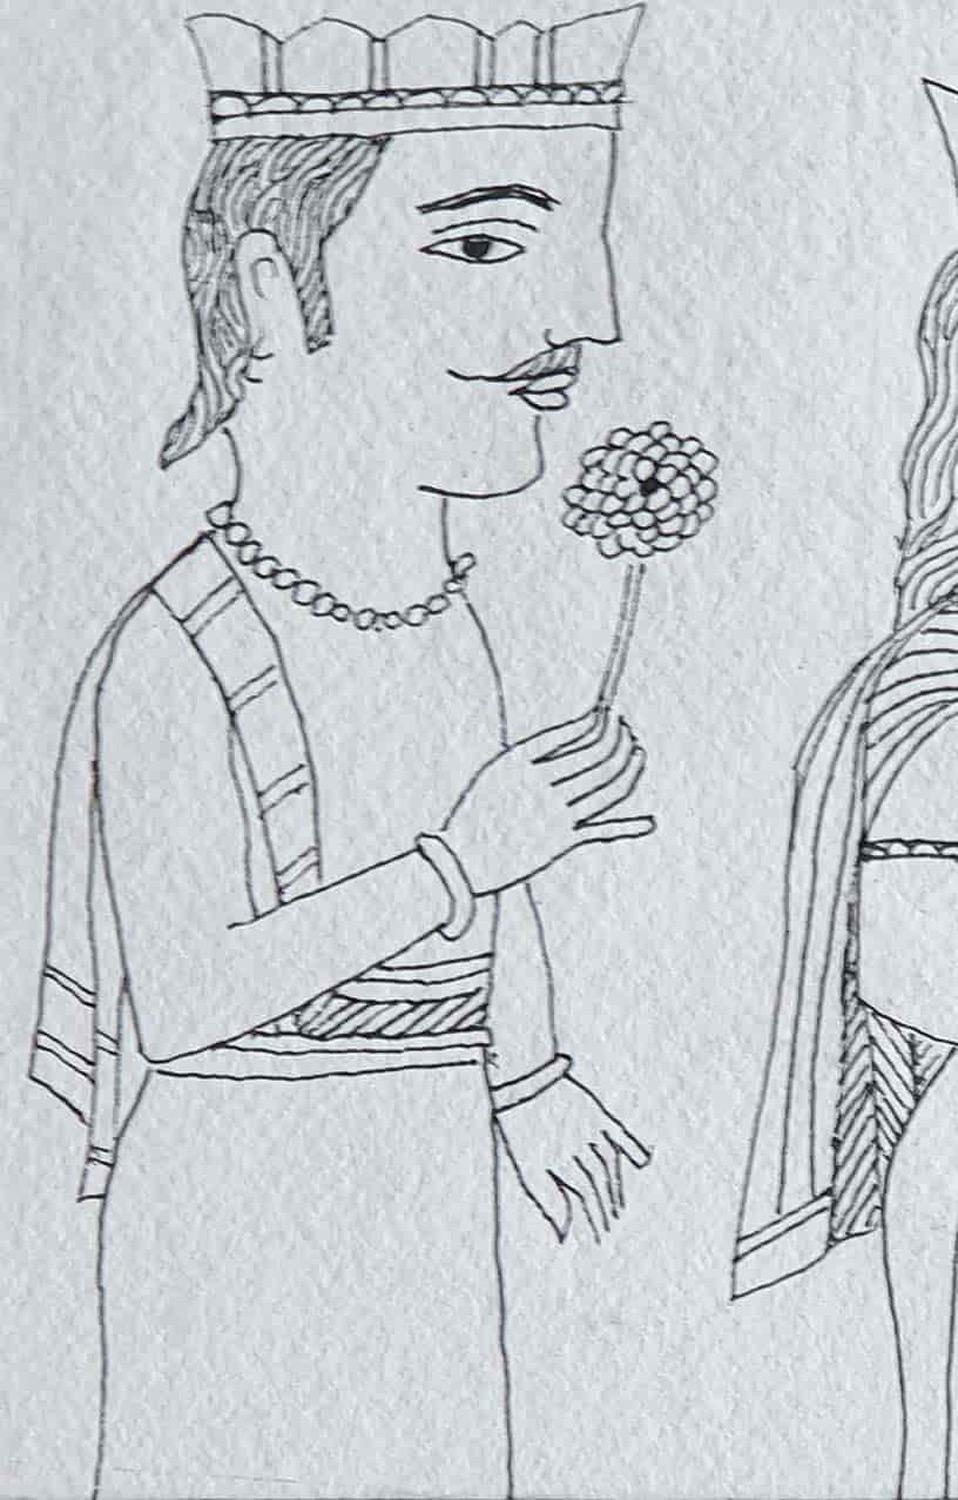 50th Wedding Anniversary, King & Queen, Ink on paper by Indian Artist 